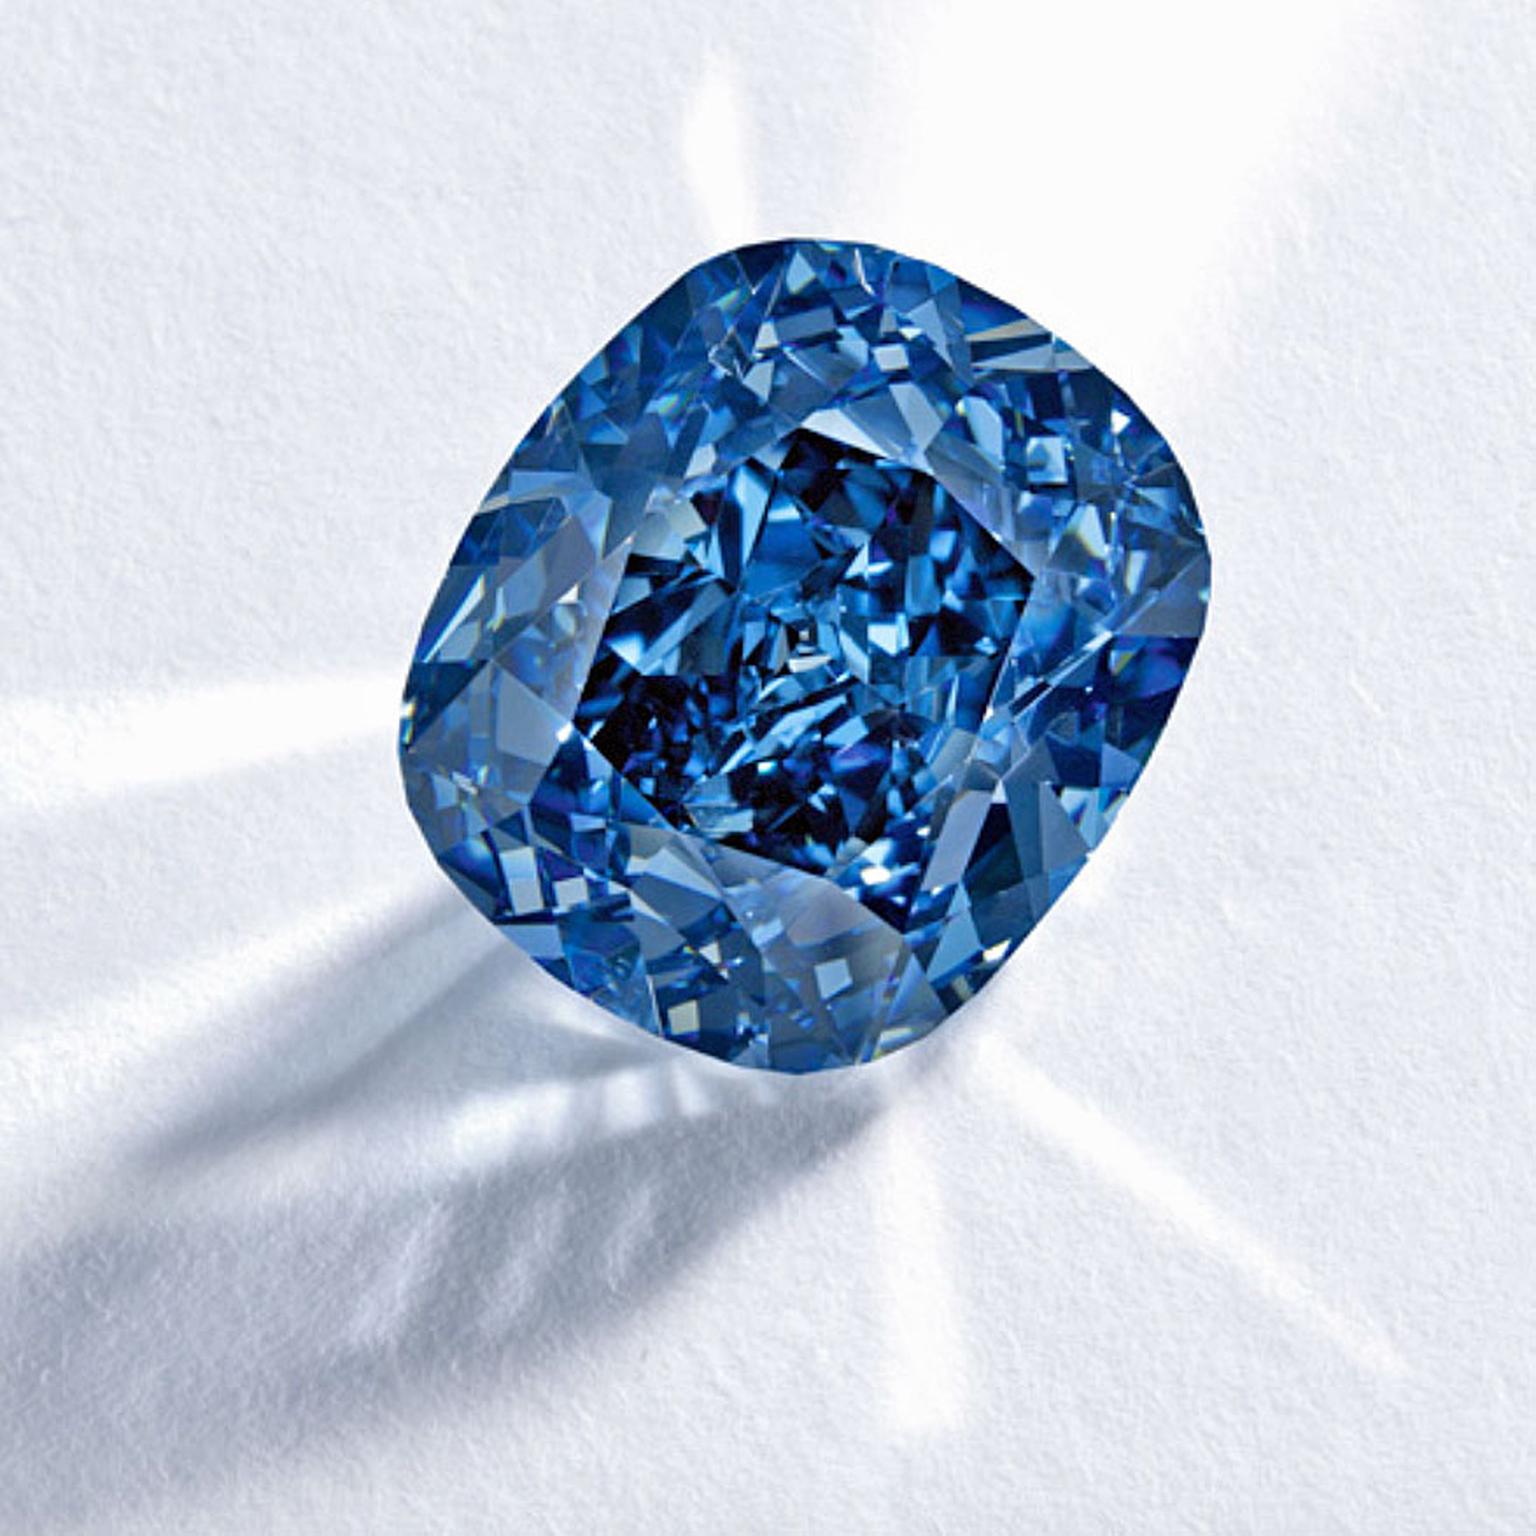 The Blue Moon Is The World S Most Expensive Blue Diamond The Jewellery Editor